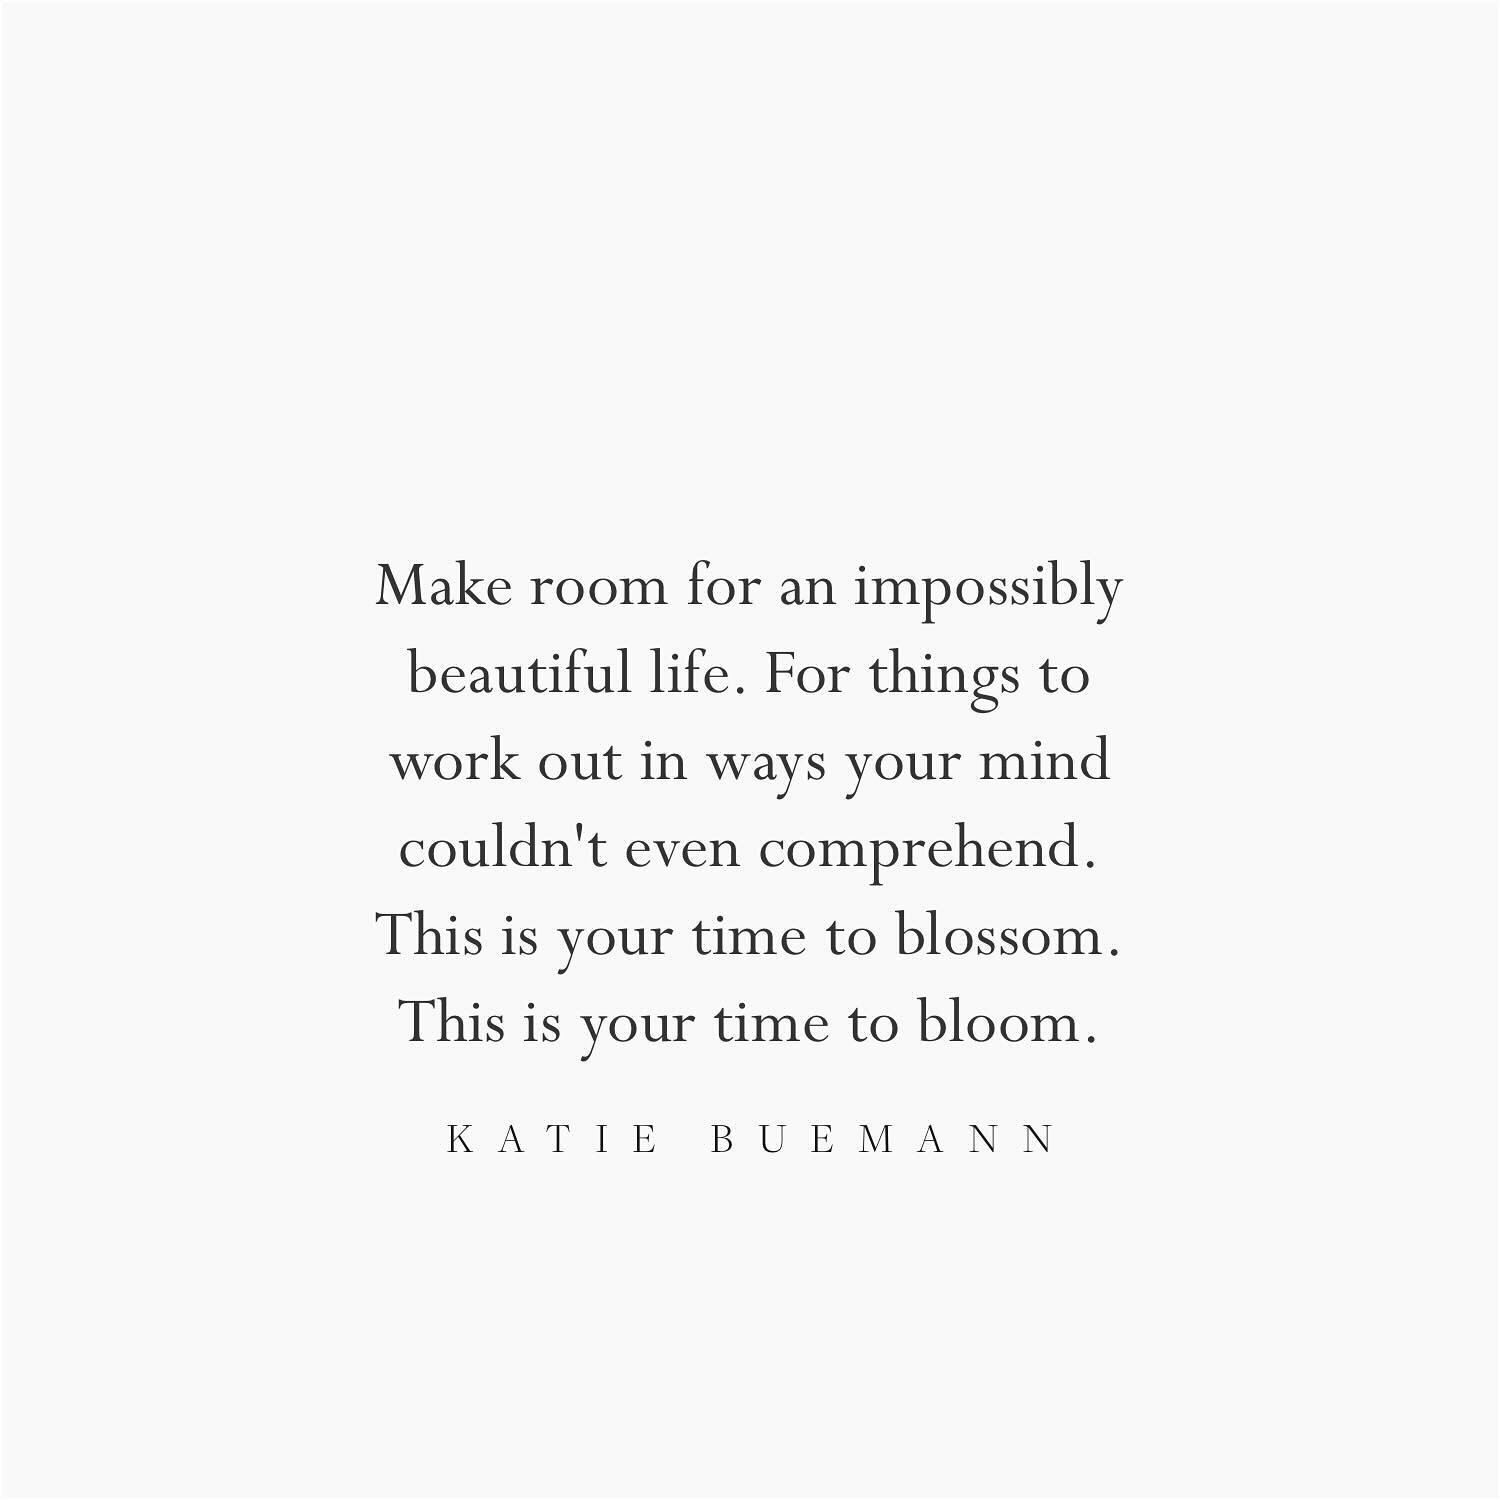 Make room.

And then gather up the courage to fill up that space with your own light.

Creation is the antidote to fear.

___________

Katie Buemann
.
.
.
.
.
.
.
.
.
.
.
.
.
.
.
.
.
.
.
.
#katiebuemann #heyyouhuman #healing #wordsofwisdom #courage #